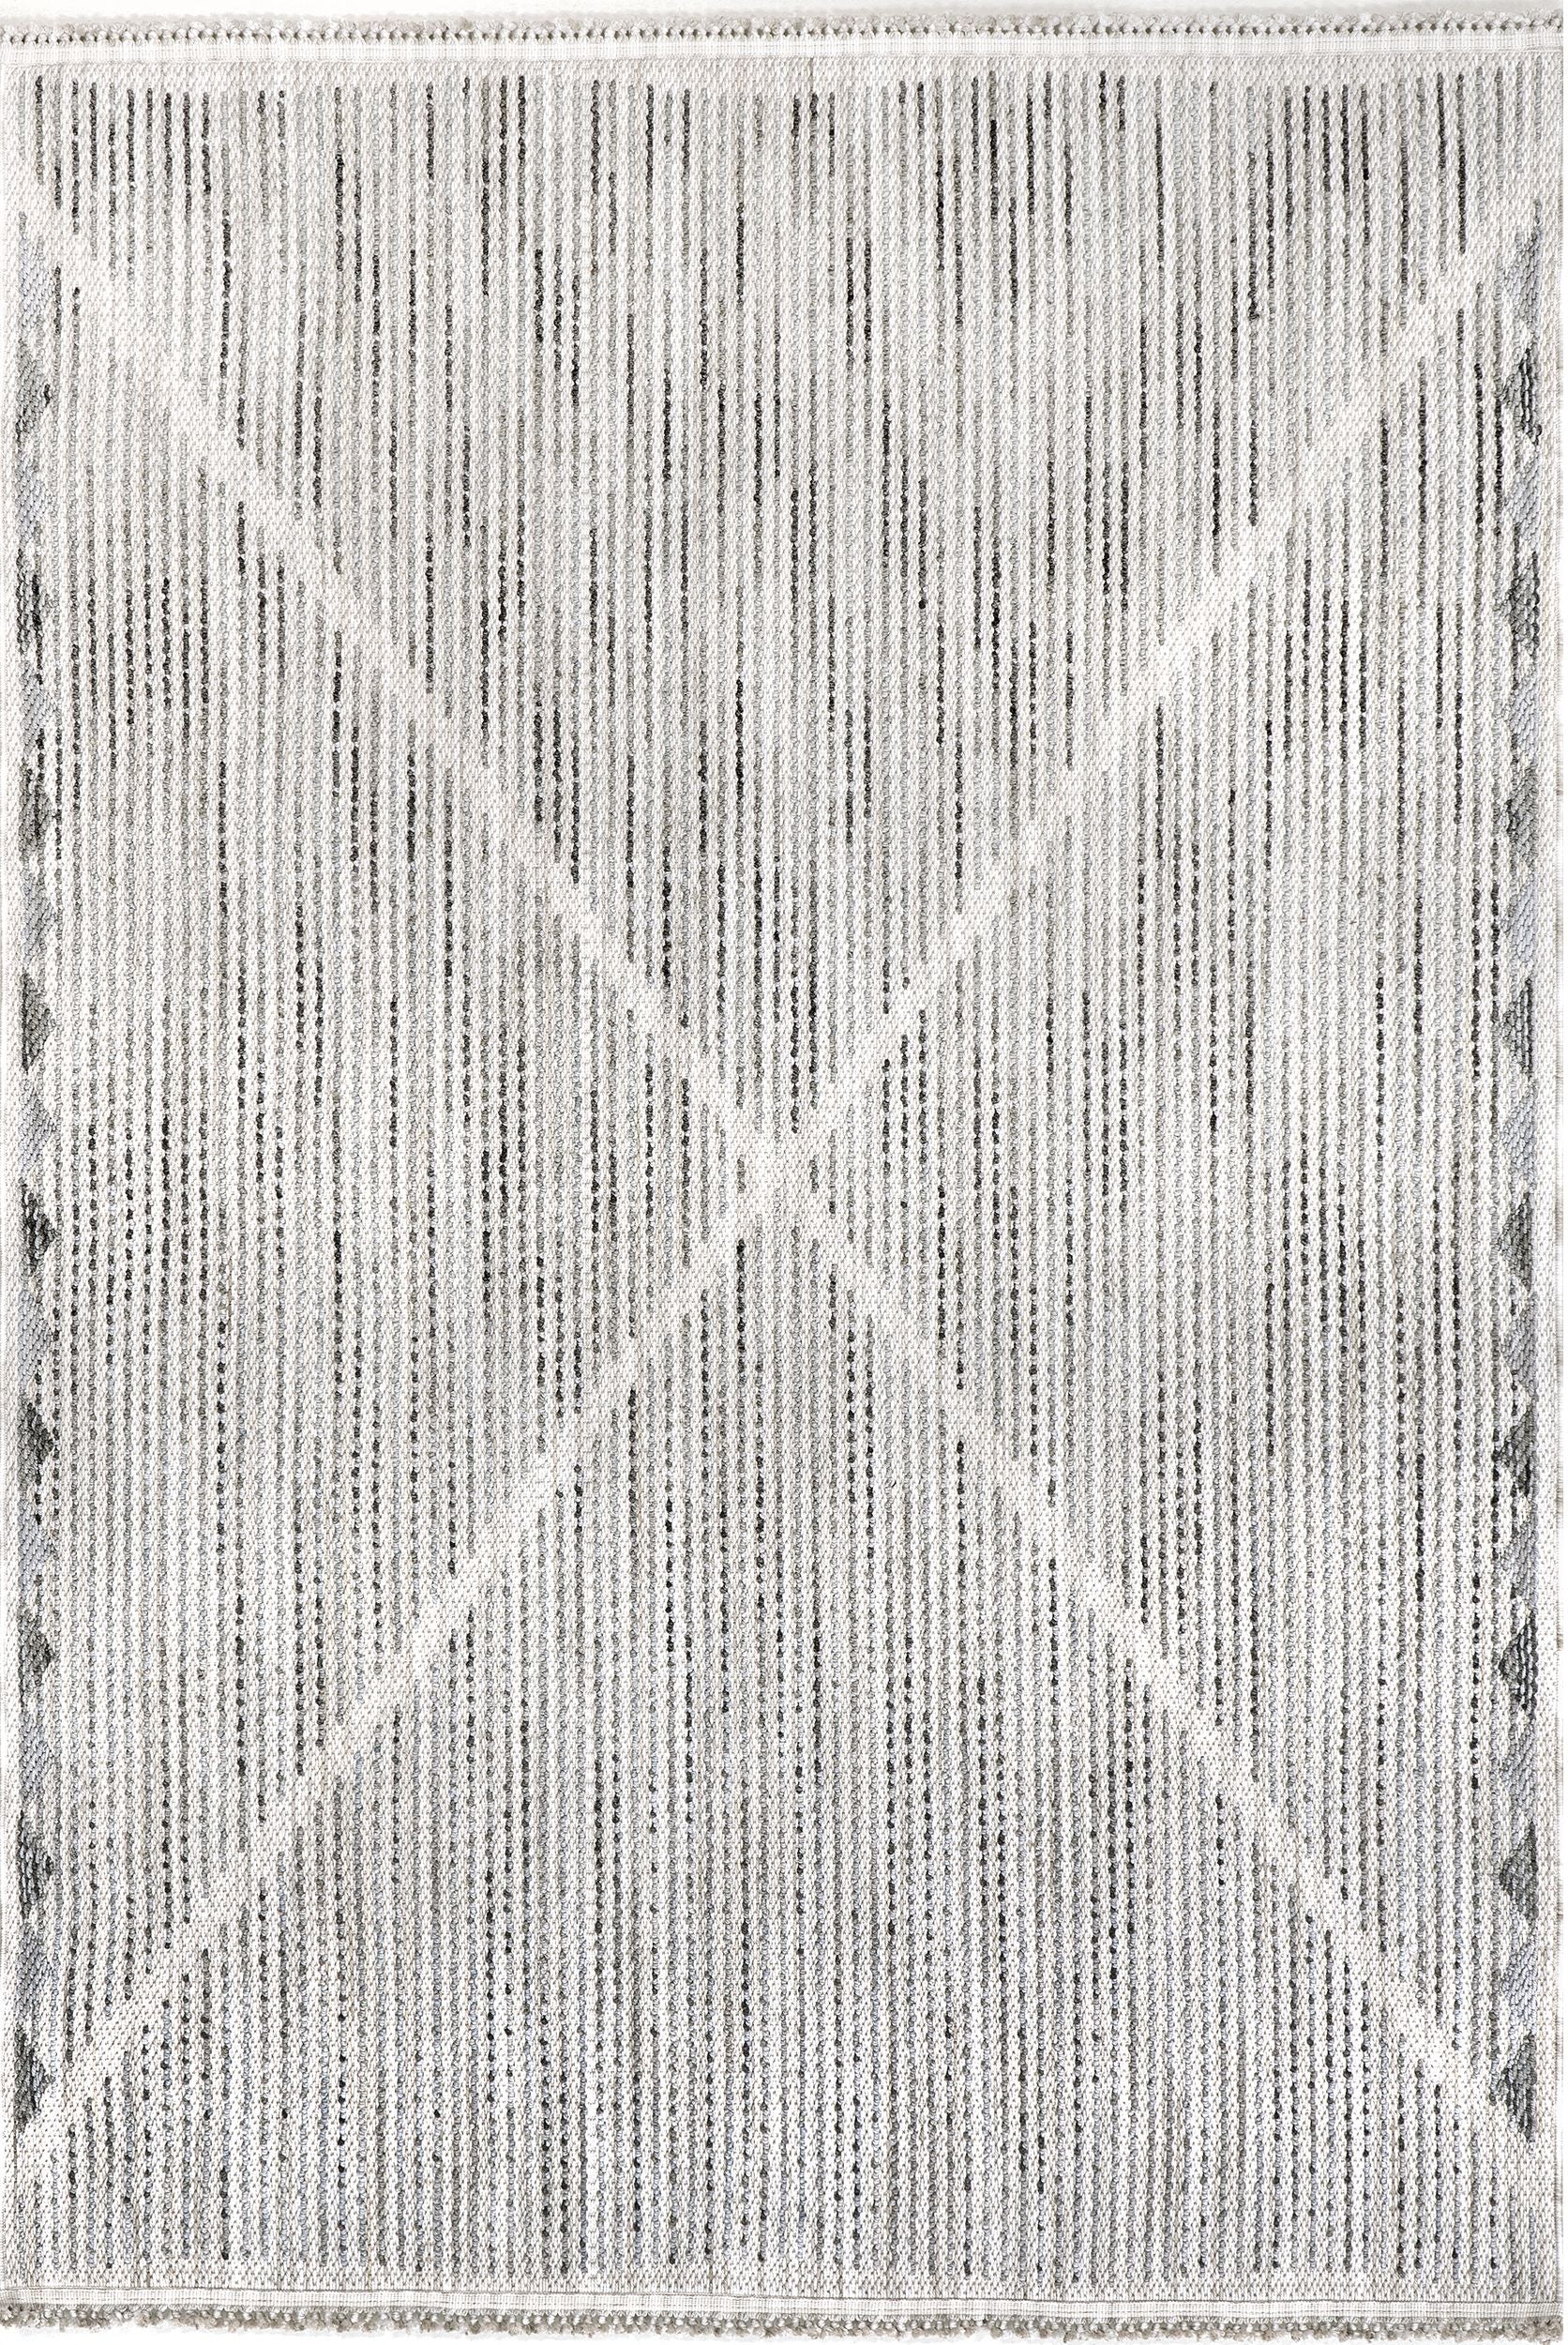 Nuloom Marna Triangular Knotted Nma2310A Light Gray Area Rug